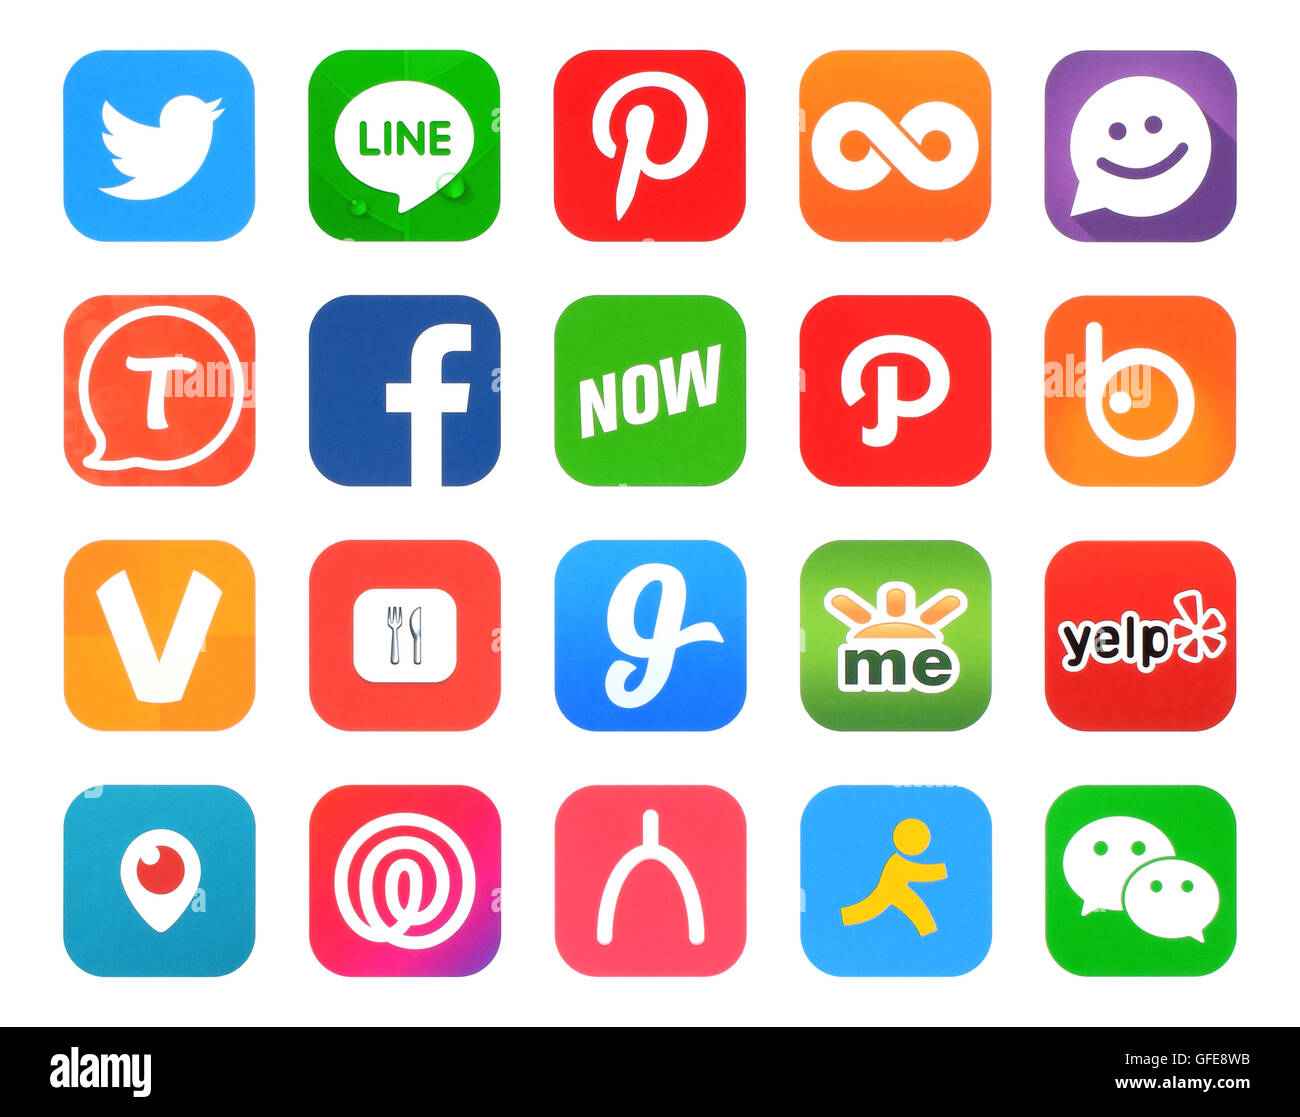 Kiev, Ukraine - April 22, 2016: Collection of popular 20 social networking icons, printed on paper, such as: Facebook, etc. Stock Photo